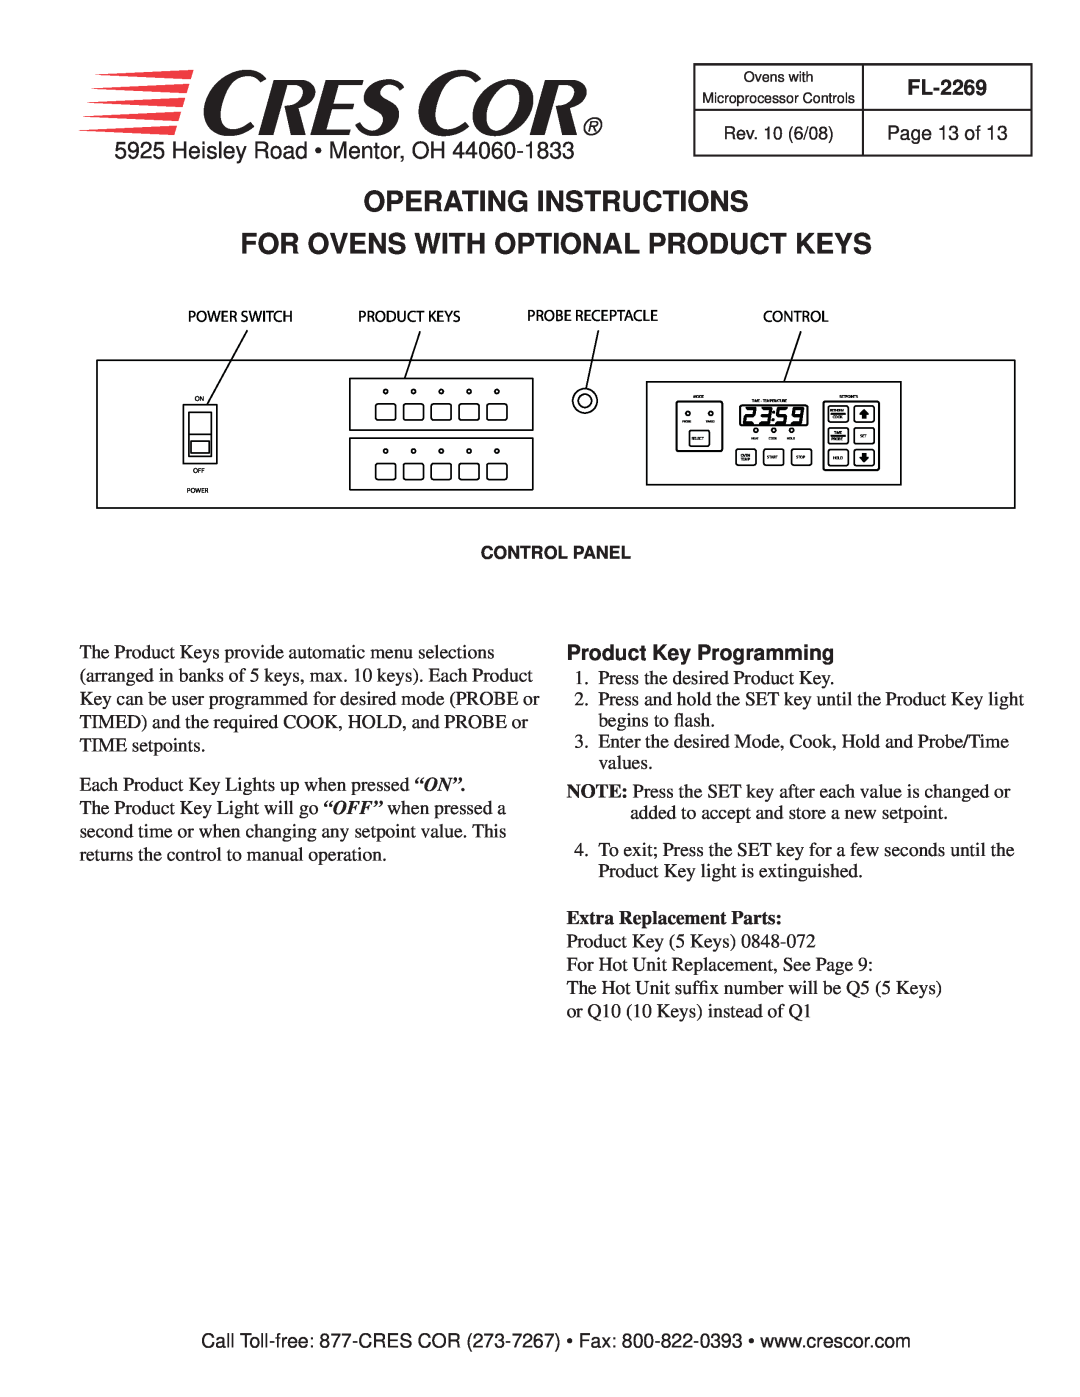 Cres Cor CO151FUA12B-Q1 Operating Instructions For Ovens With Optional Product Keys, Heisley Road Mentor, OH, FL-2269 